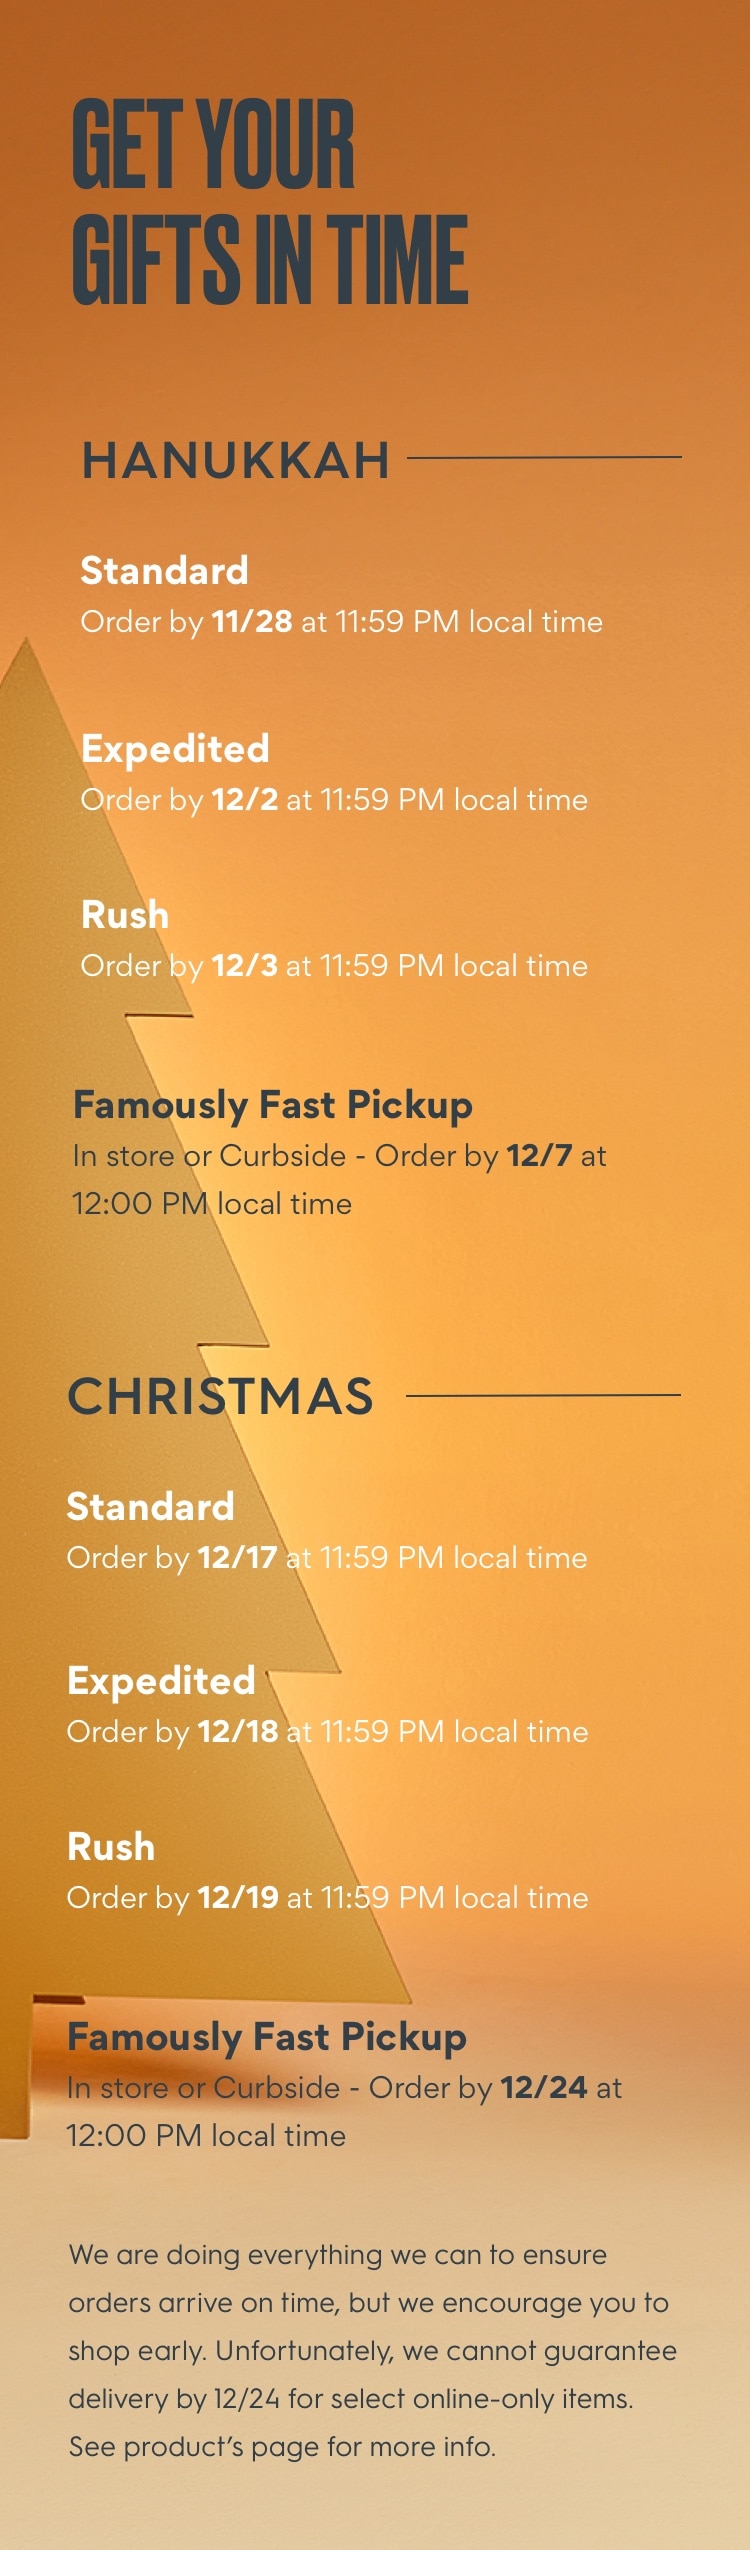 GET YOUR GIFTS IN TIME: HANUKKAH: Standard Order by 11/28 at 11:59 PM local time, Expedited Order by 12/2 at 11:59 PM local time, Rush Order by 12/3 at 11:59 PM local time, or Famously Fast Pickup in st ore or curbside. Order by 12/7 at 12:00 PM local time. CHRISTMAS: Standard Order by 12/17 at 11:59 PM local time, Expedited Order by 12/18 at 11:59 PM local time, Rush Order by 12/19 at 11:59 PM local time, or Famously Fast Pickup in store or curbside. Order by 12/24 at 12:00 PM local time. We are doing everything we can to ensure orders arrive on time, but we encourage you to shop early. Unfortunately, we cannot guarantee delivery by 12/24 for select online - only items. See product’s page for more info.